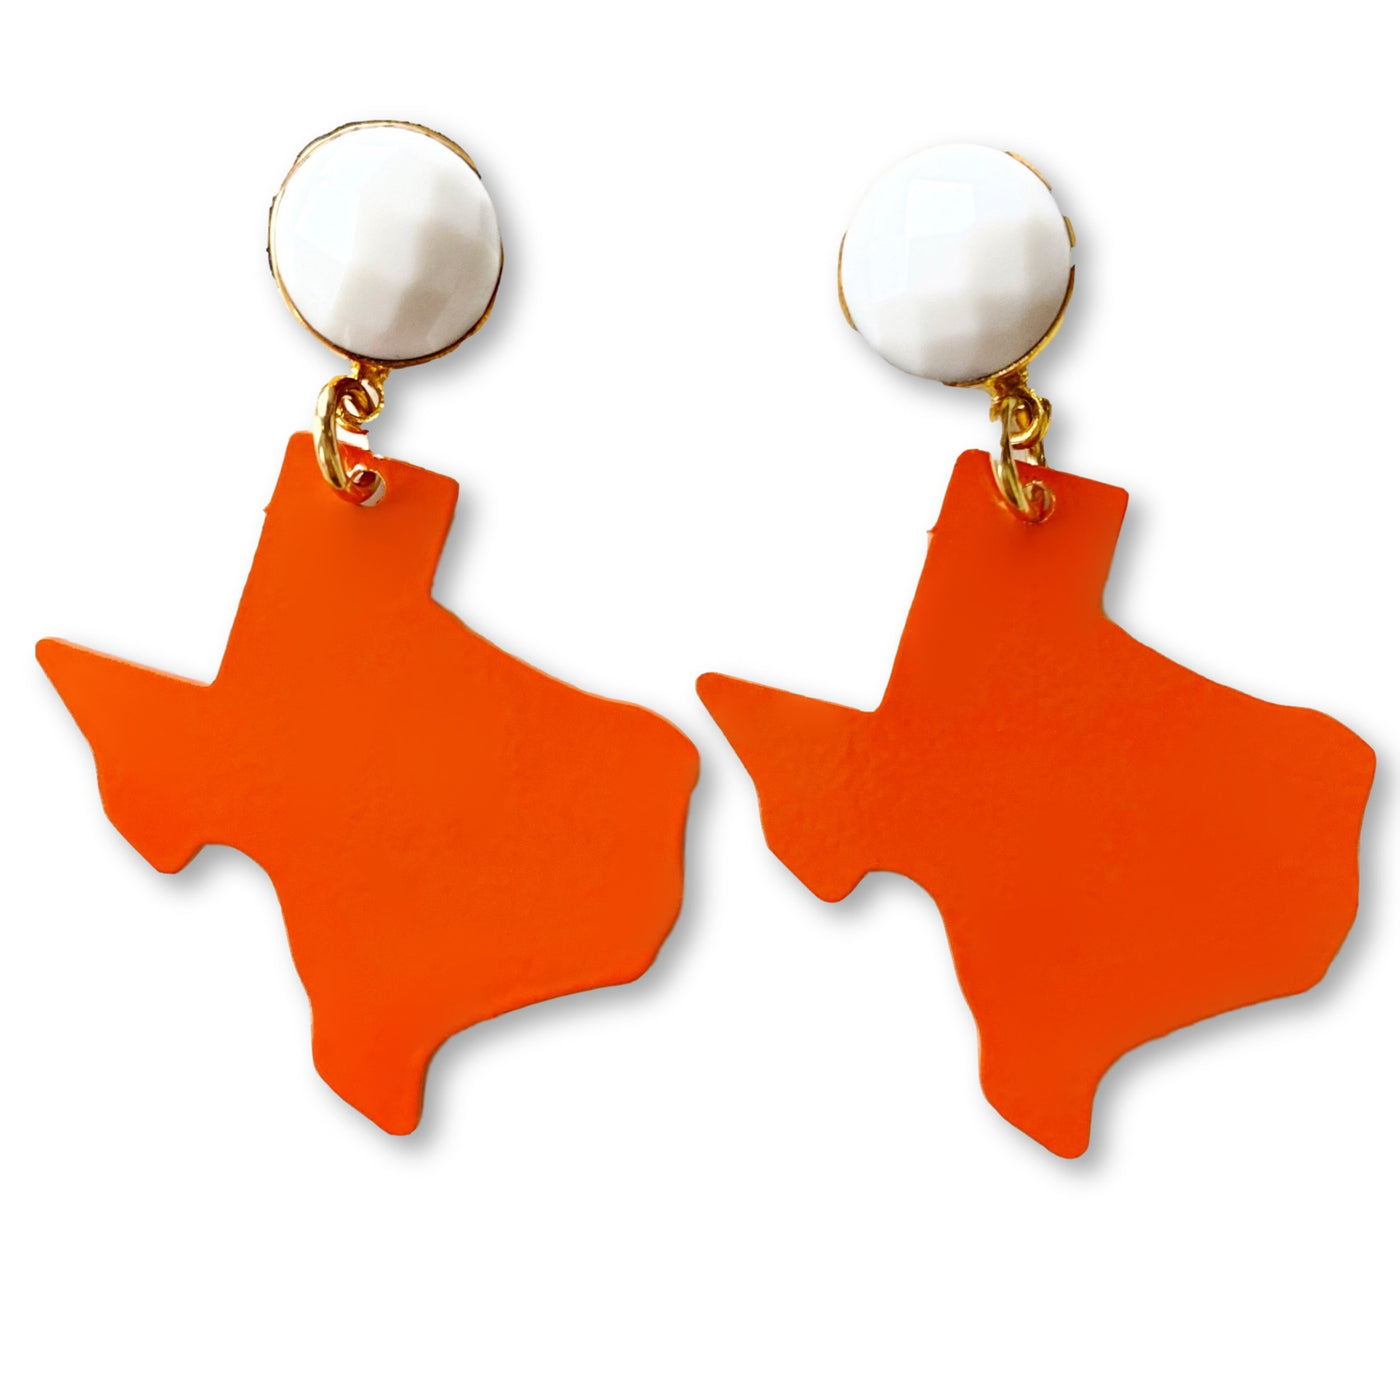 Texas Proud Metal Small Orange Shape of Texas with White Agate